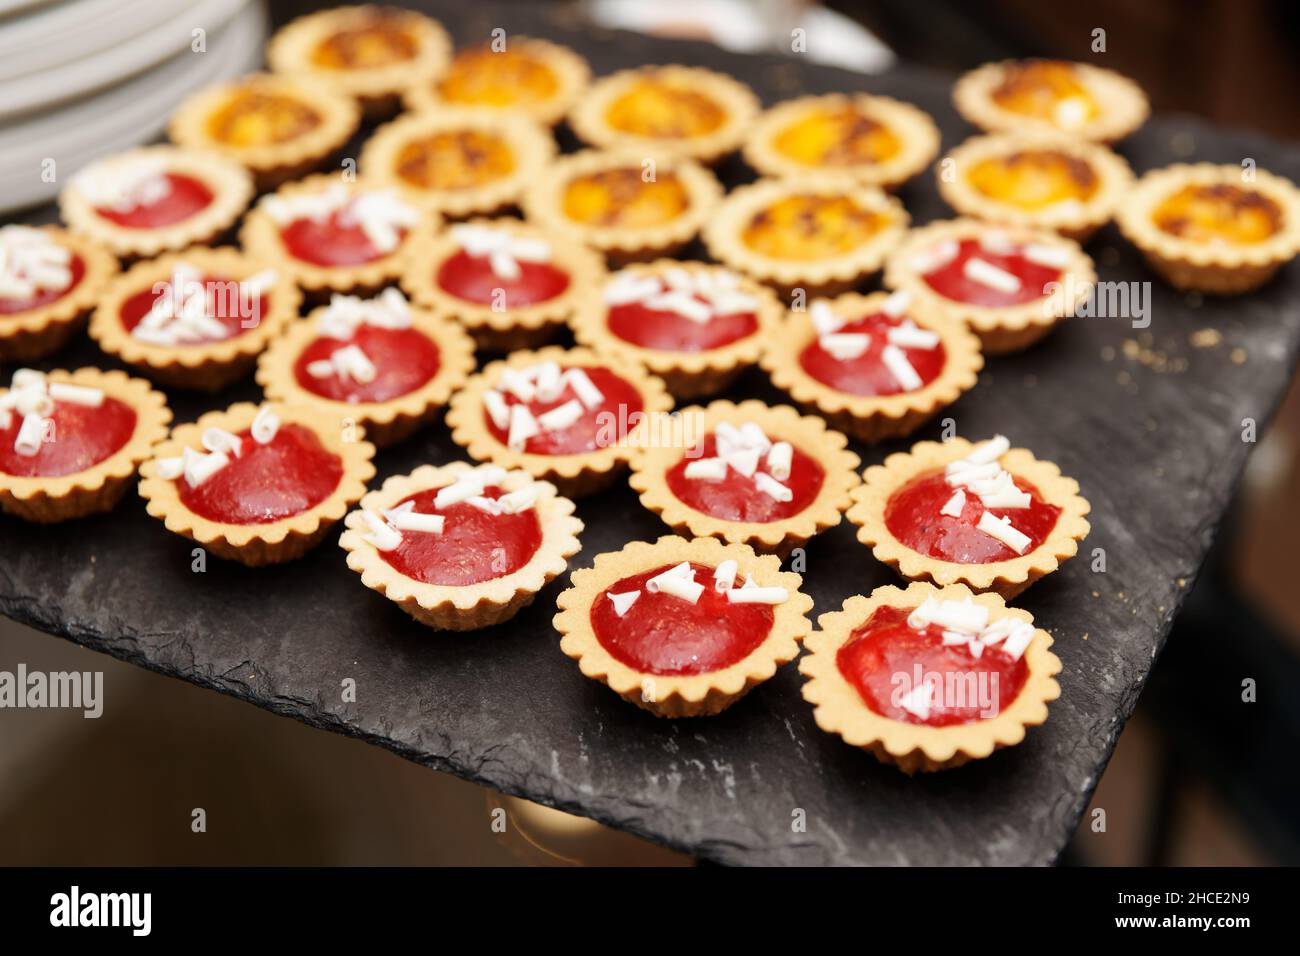 Tartlets with jam on banquet table, close-up Stock Photo